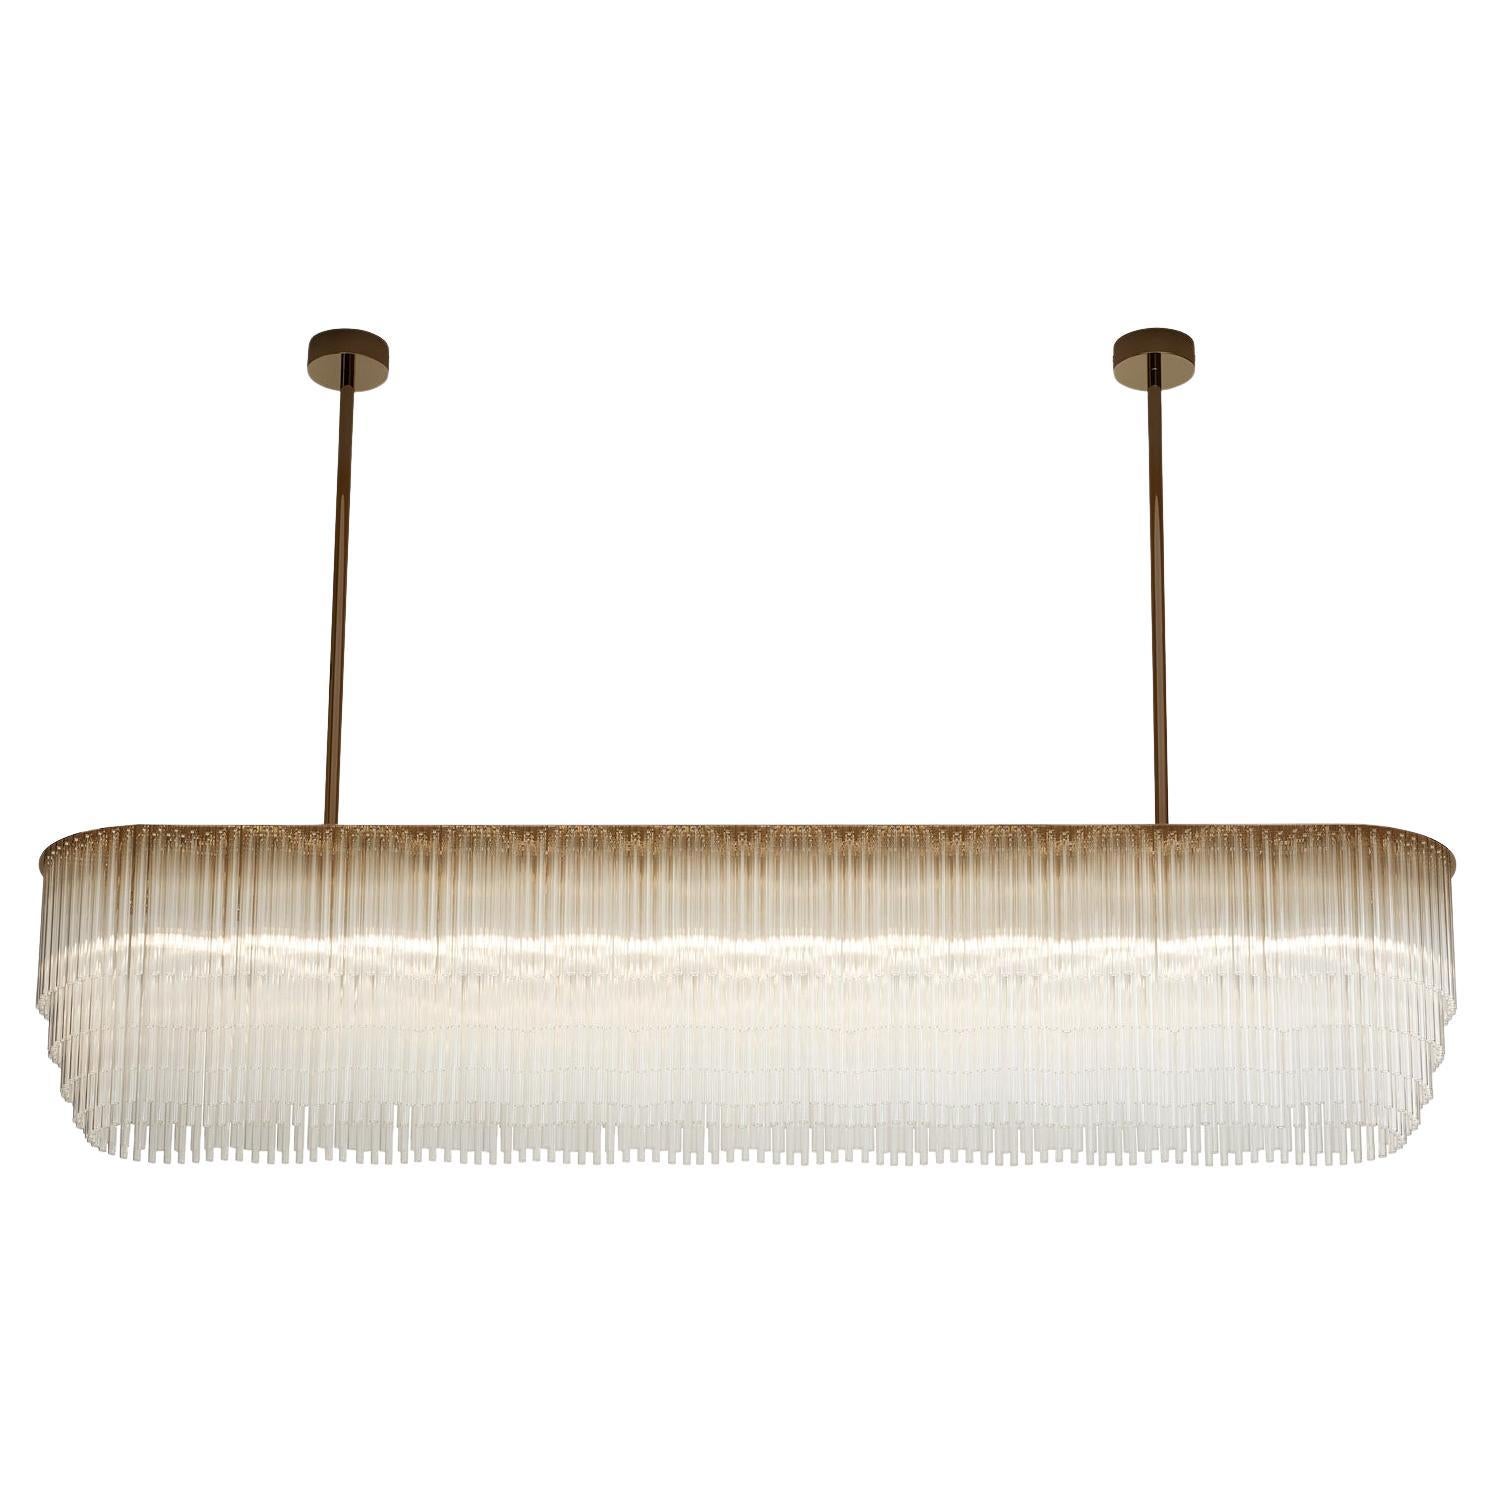 Linear Chandelier 1479mm / 58.25" in Brass-based Bronze and Tiered Glass Profile For Sale